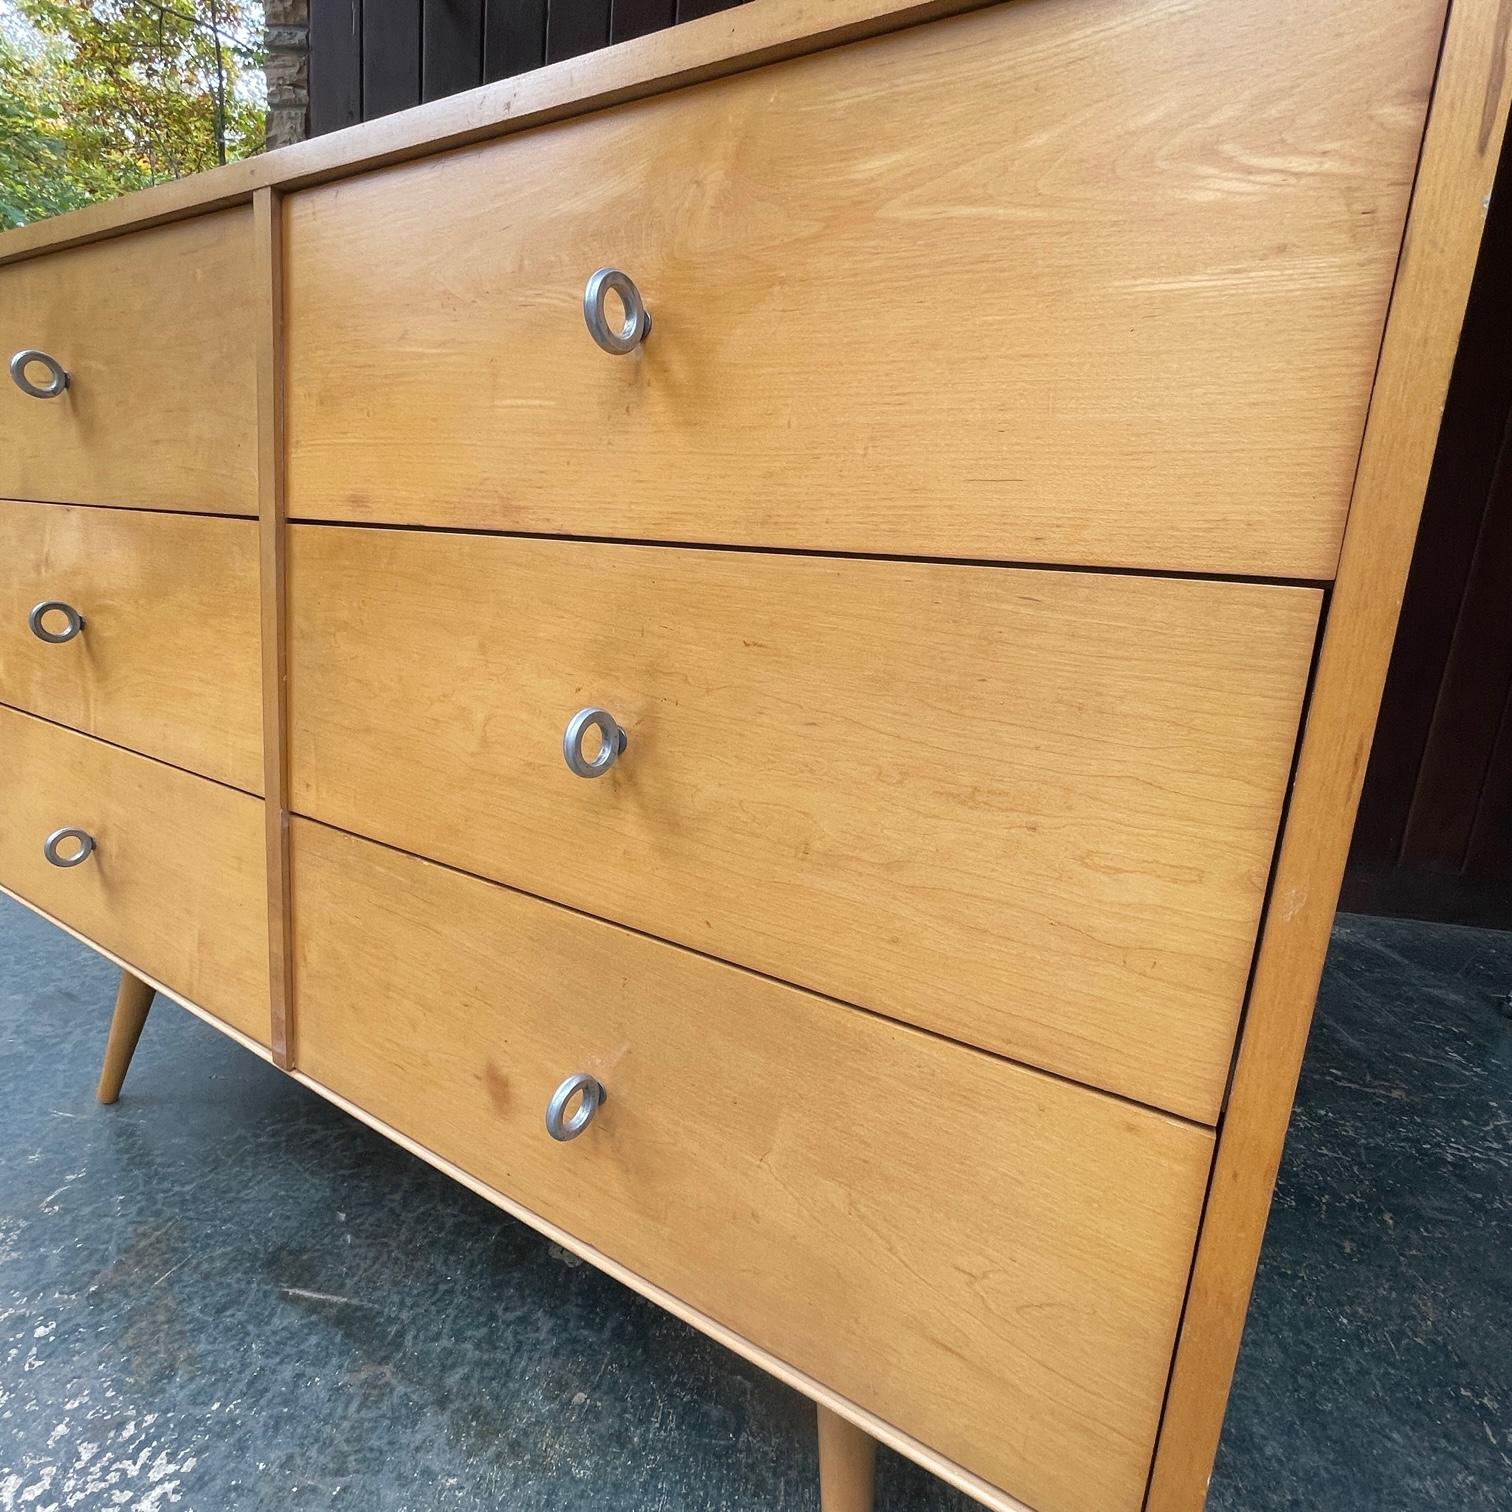 Unrestored condition, procured from original owners.  Scratches, Light Fading and patina on all surfaces.  Pulls are straight and strong.  Numbers on the drawers match the cabinet number.  The six drawer unit is strongly adhered to supporting bench